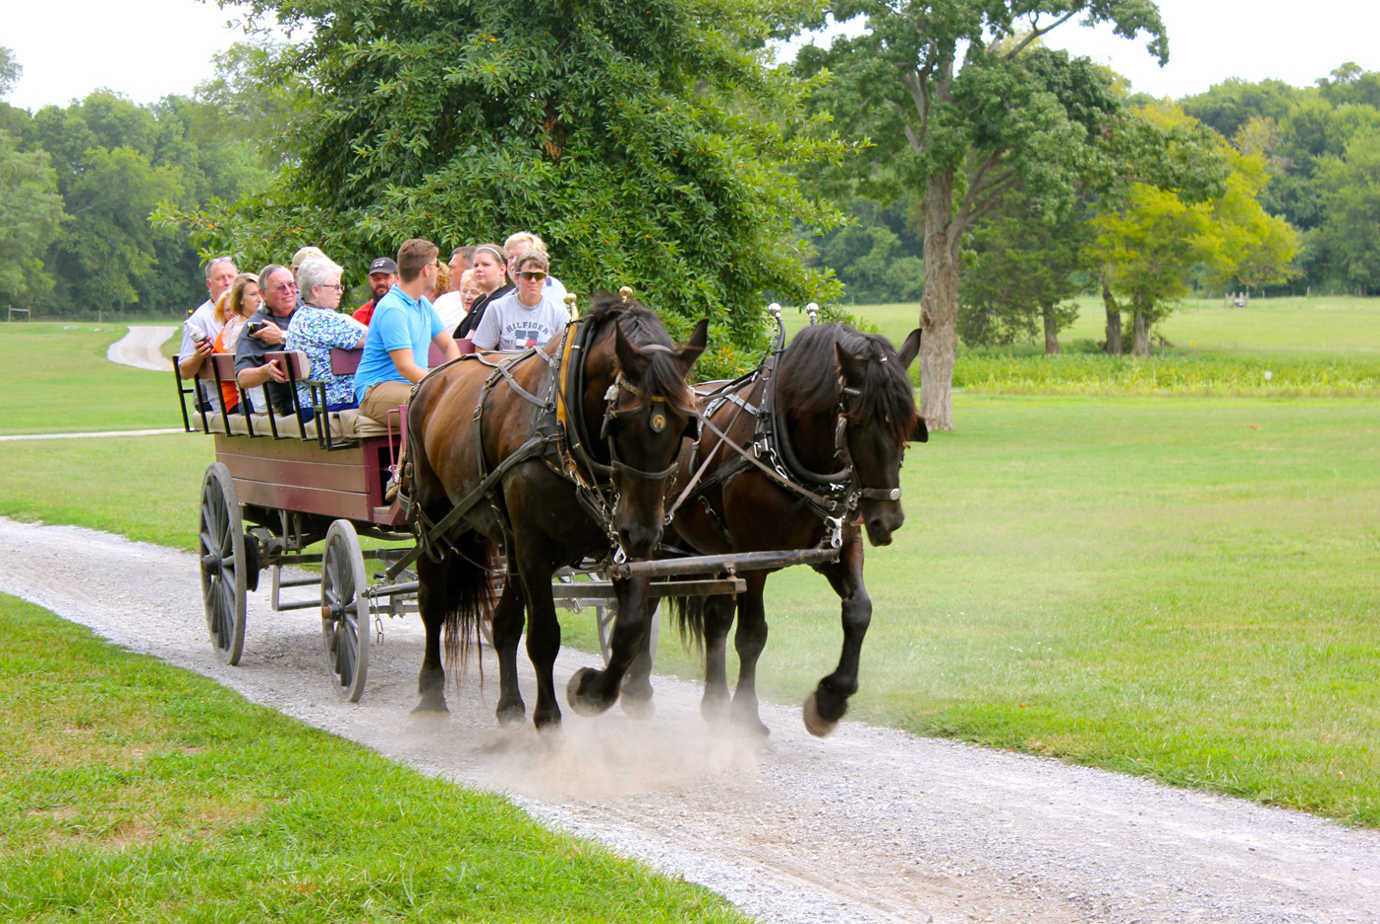 A wagon ride at Andrew Jackson's Hermitage. Image courtesy of The Hermitage.